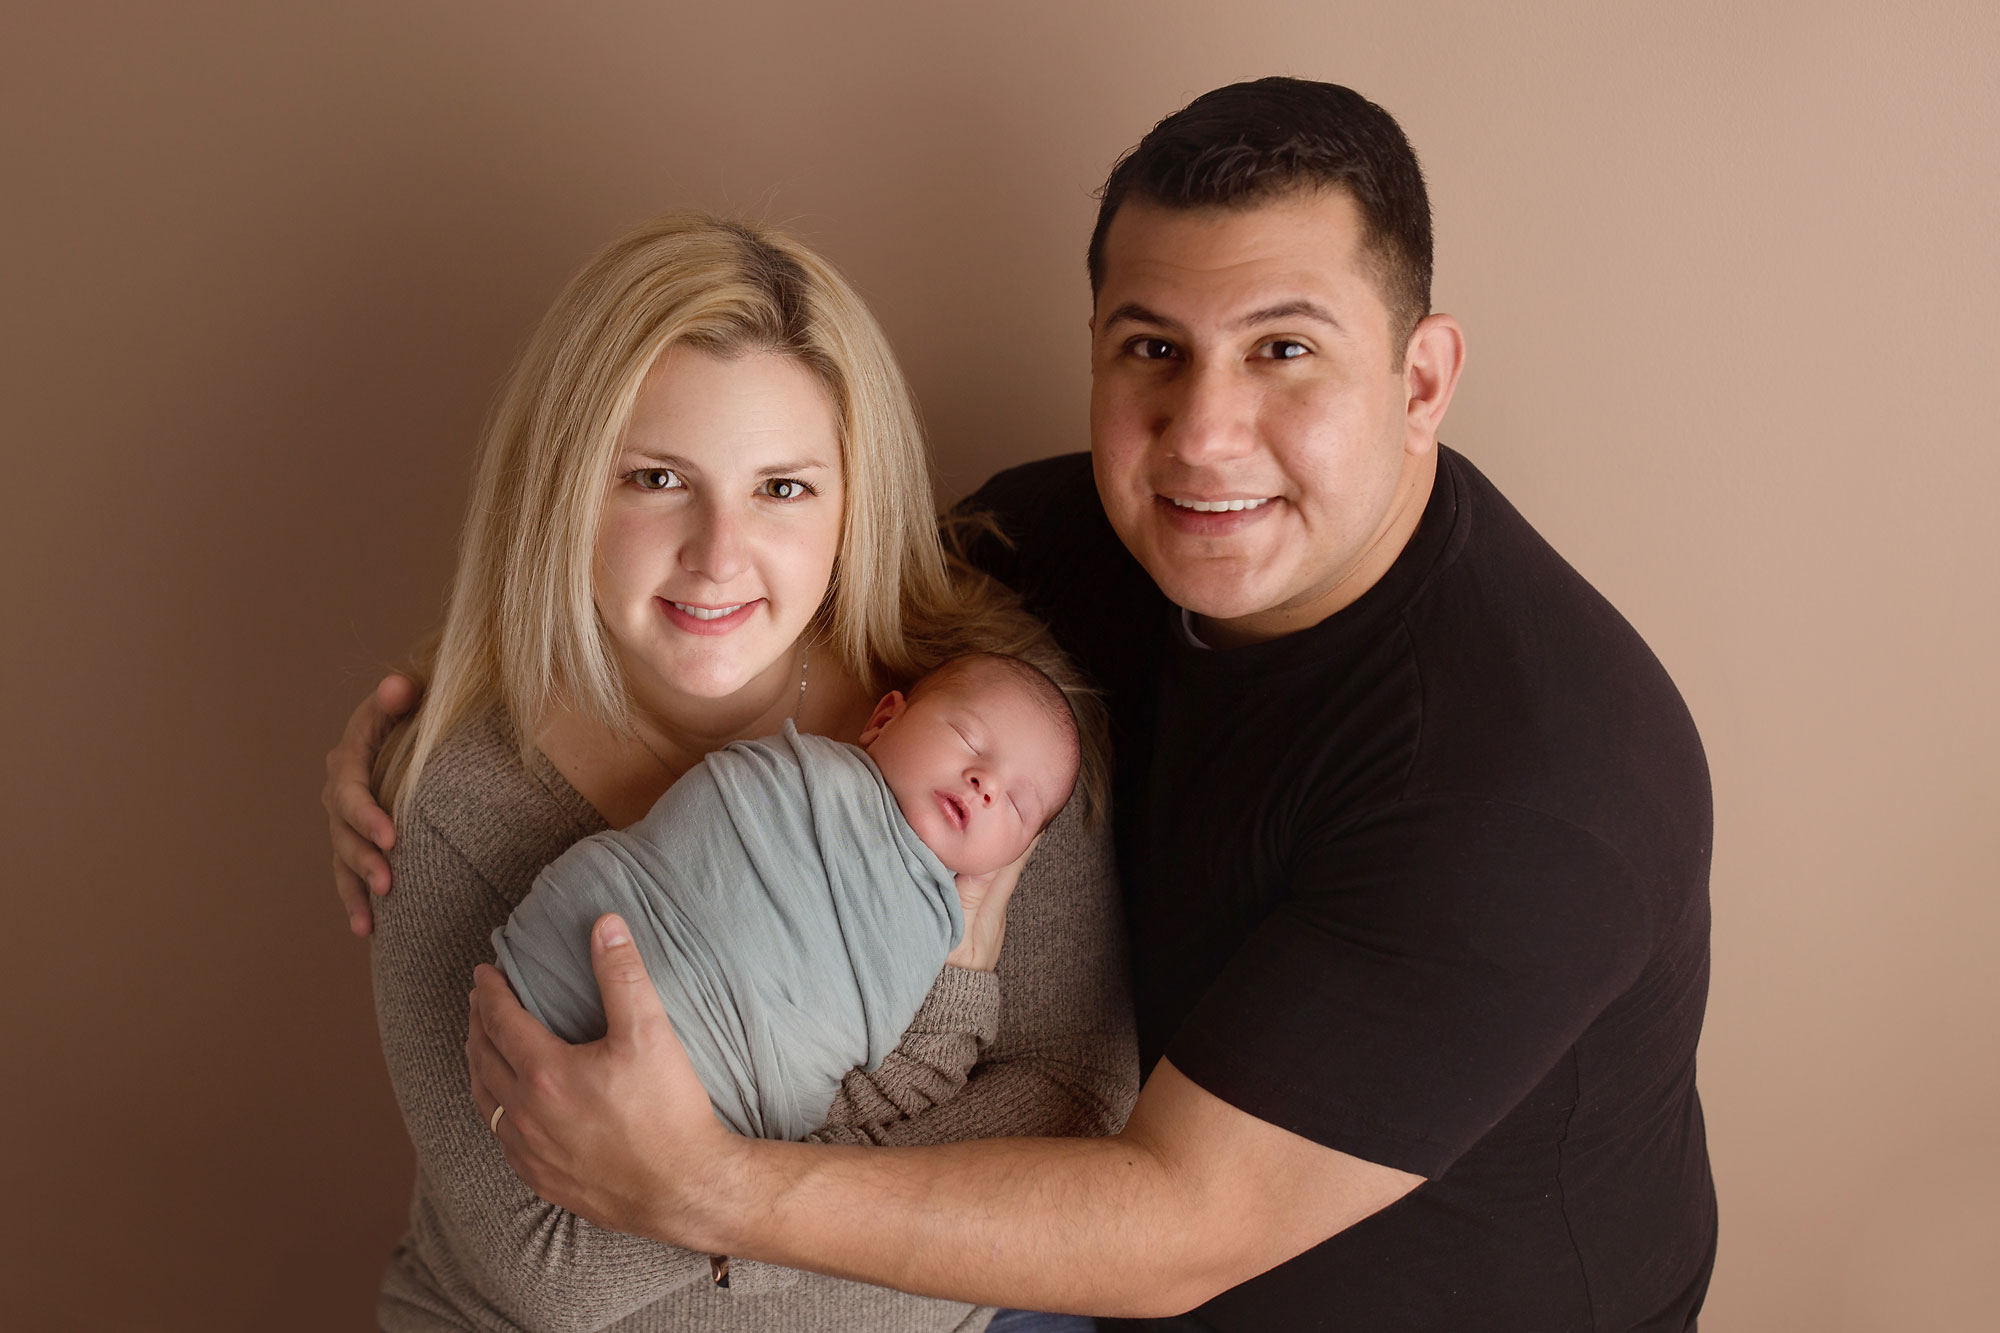 baby and family pictures new jersey, parents holding swaddled baby boy